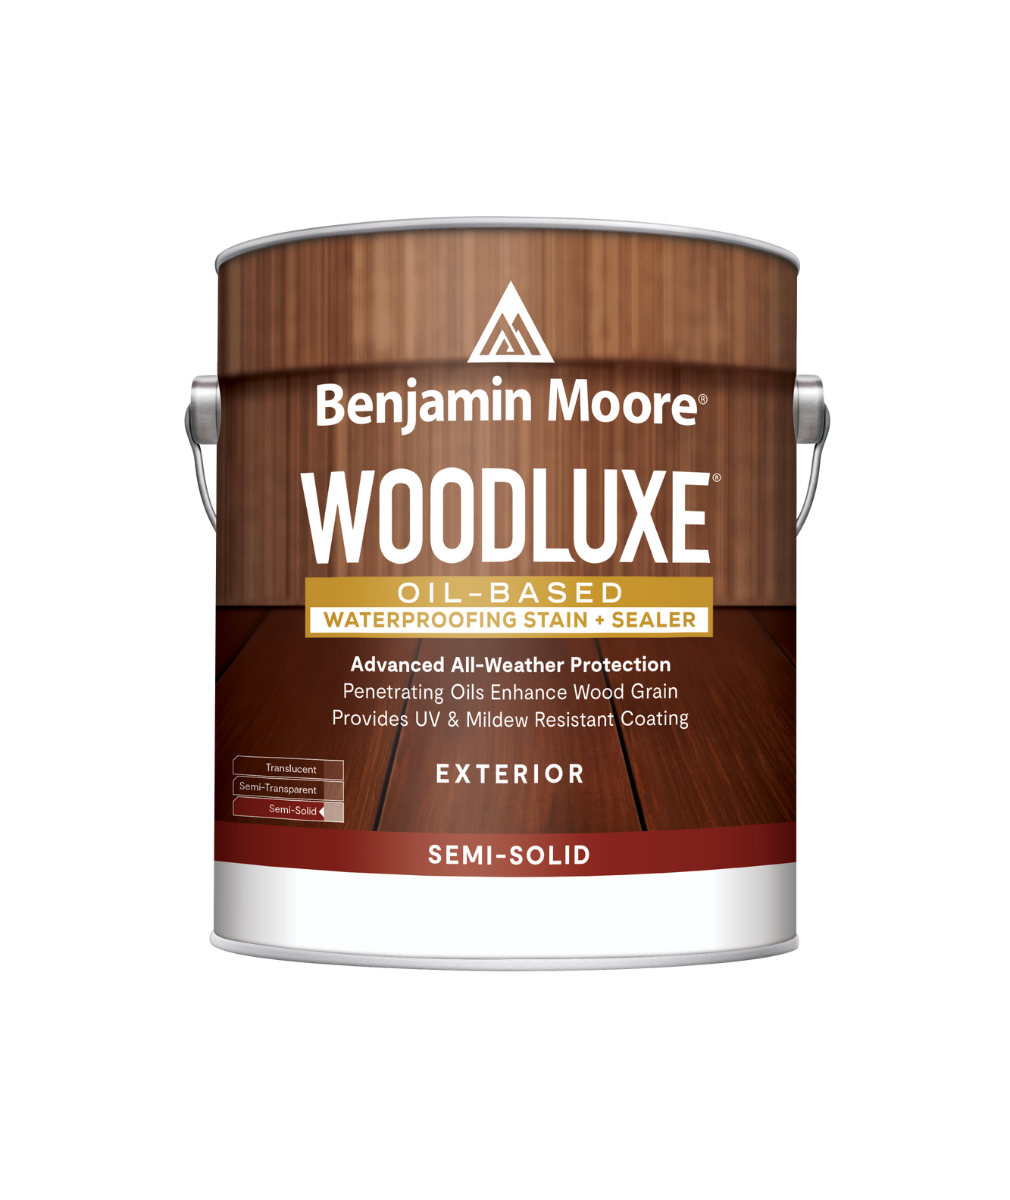 Benjamin Moore Woodluxe® Oil-Based Semi-Solid Exterior Stain available at Southwestern Paint.